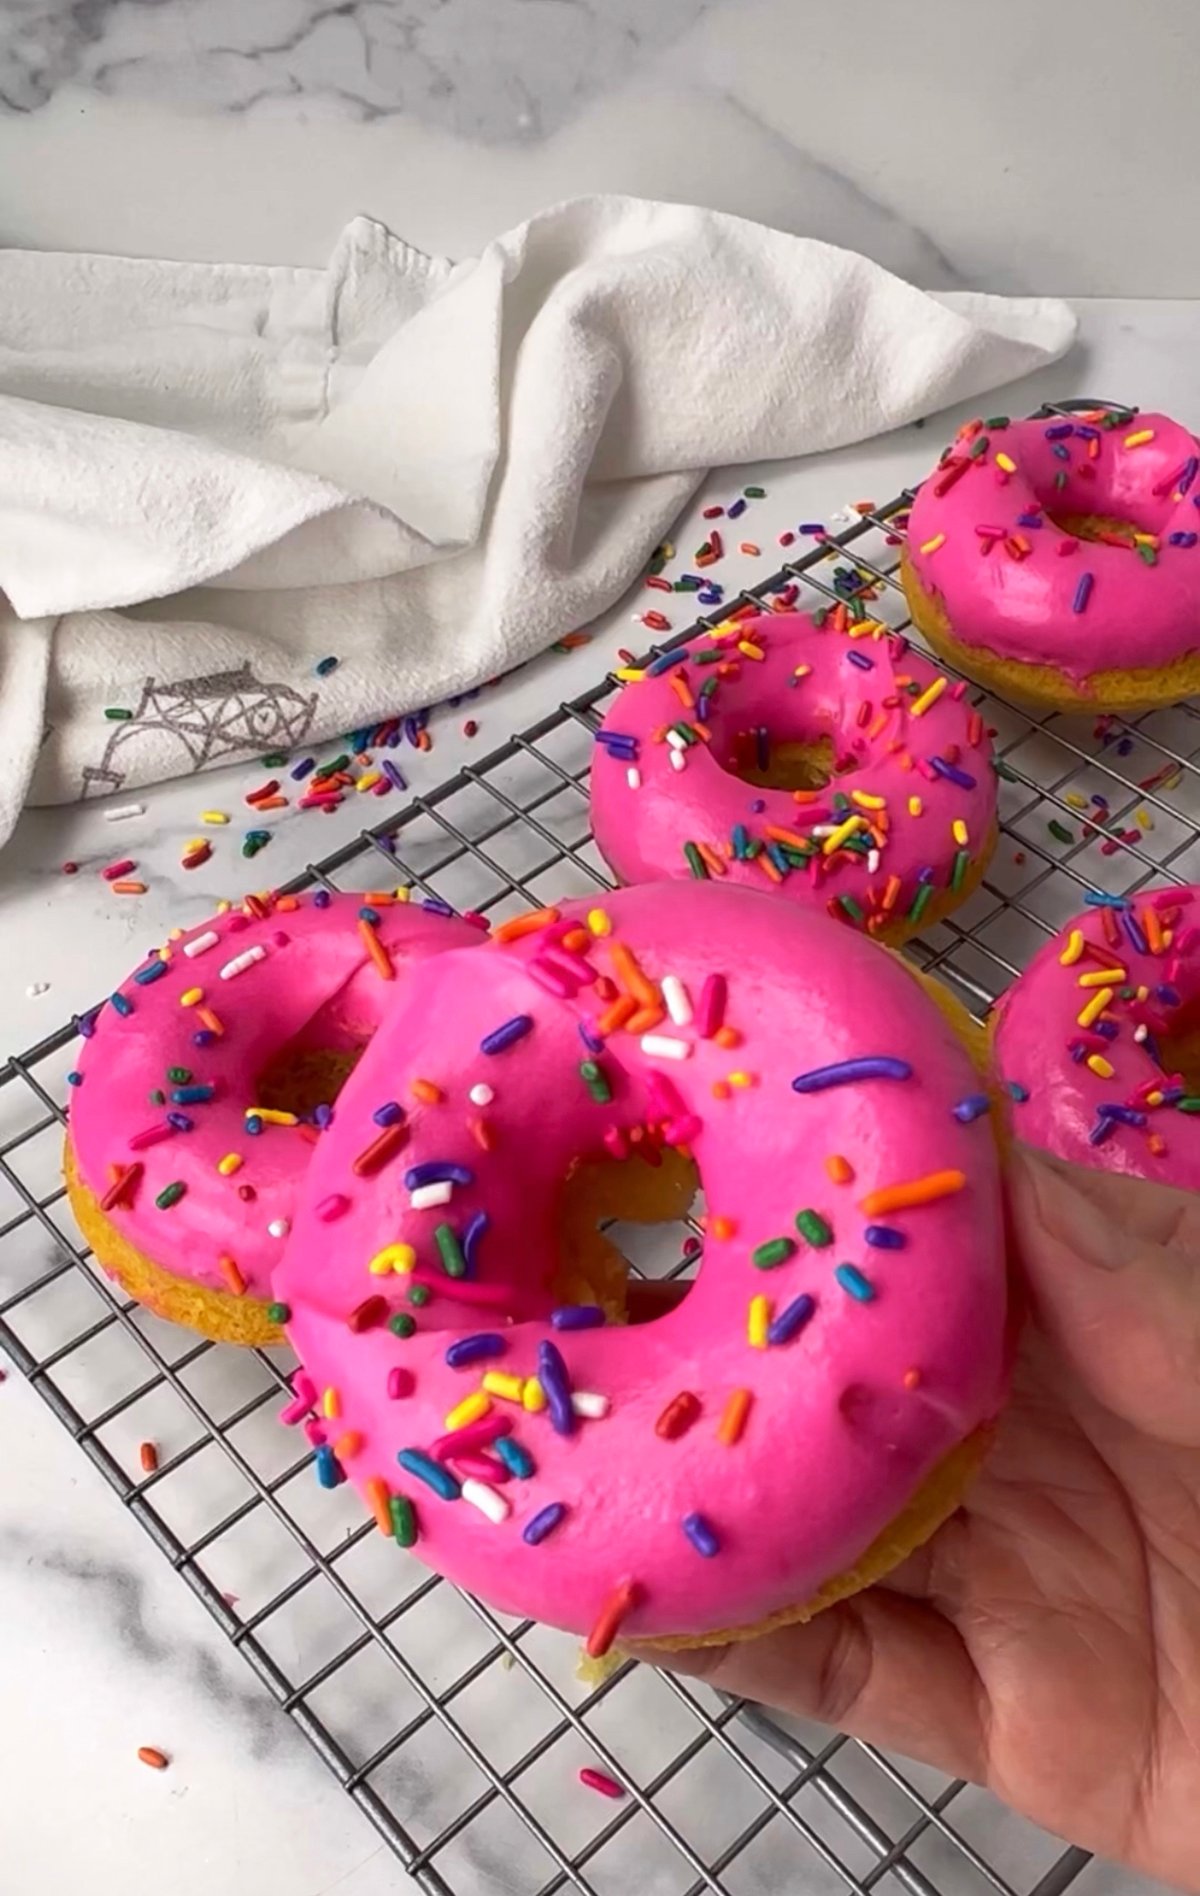 Yummy pink frosted cake donuts.